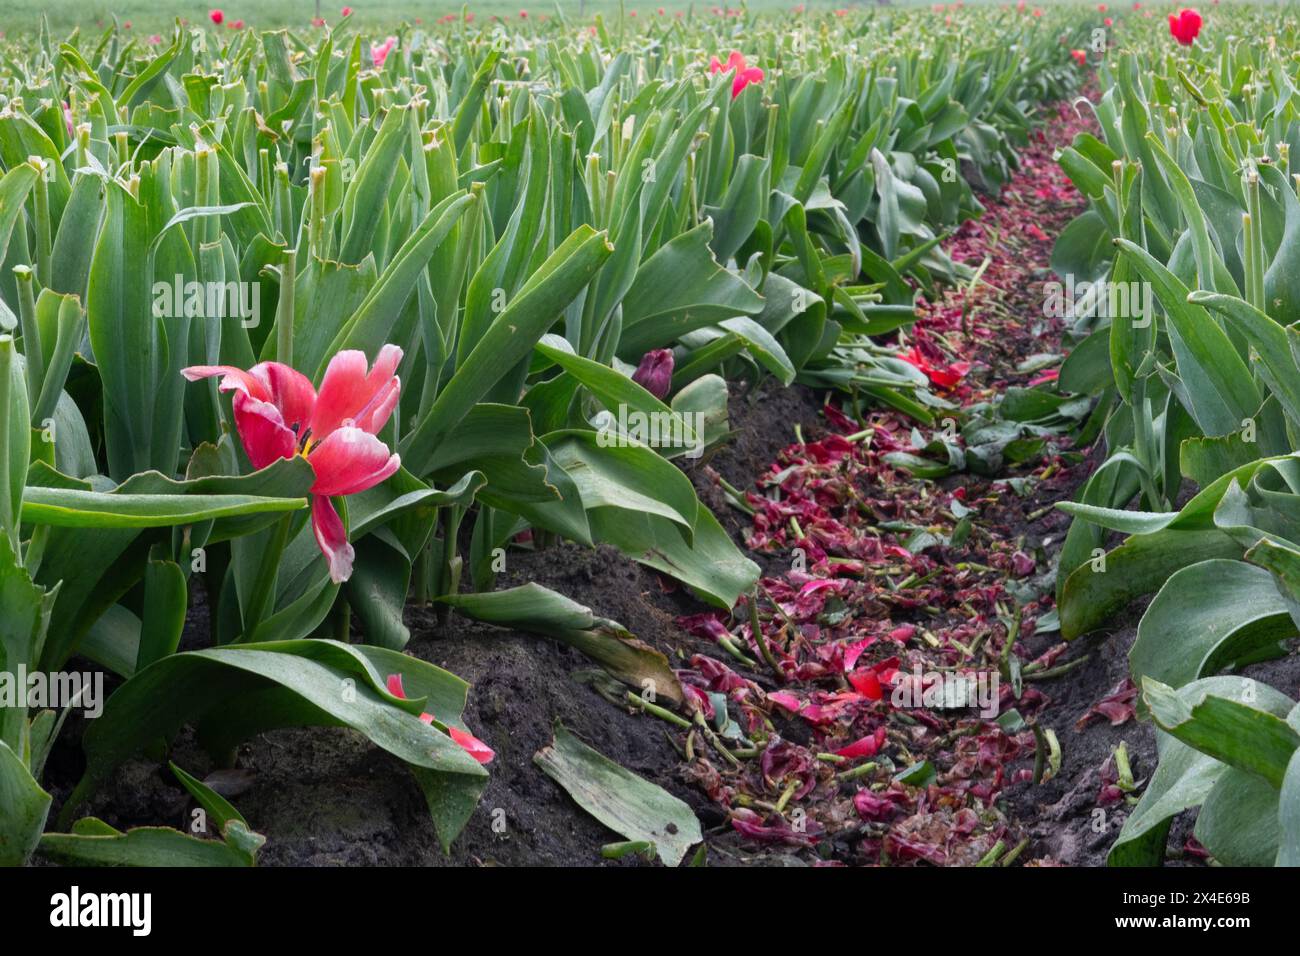 Cultivation of tulip bulbs, almost all flower heads have been cut off Stock Photo